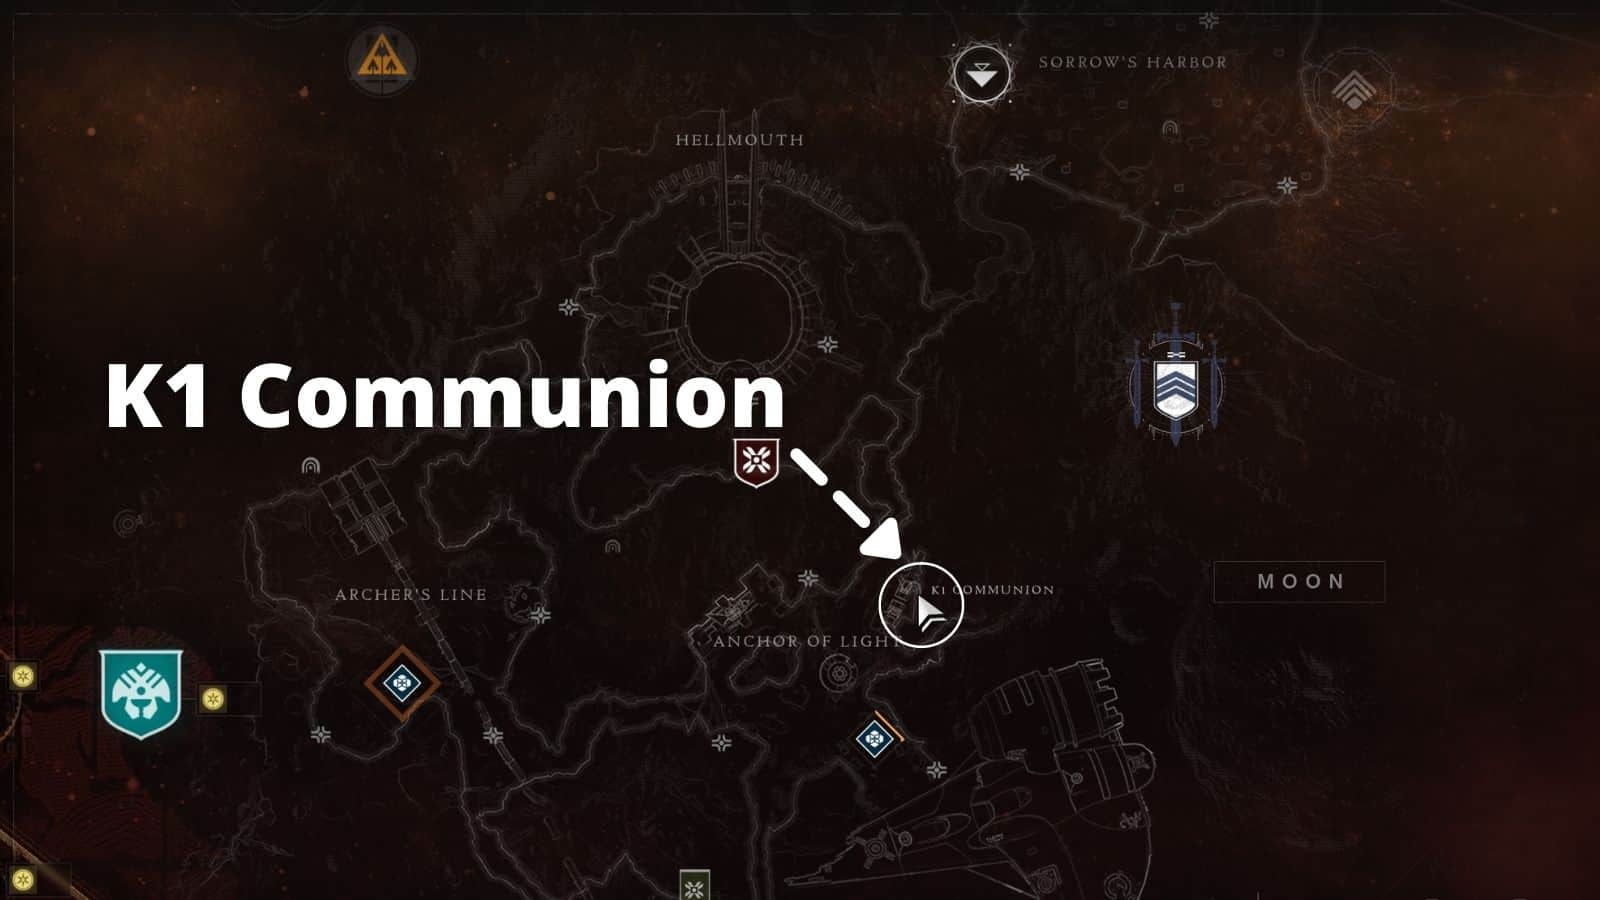 K1 Communion Lost Sector location Destiny 2 featured